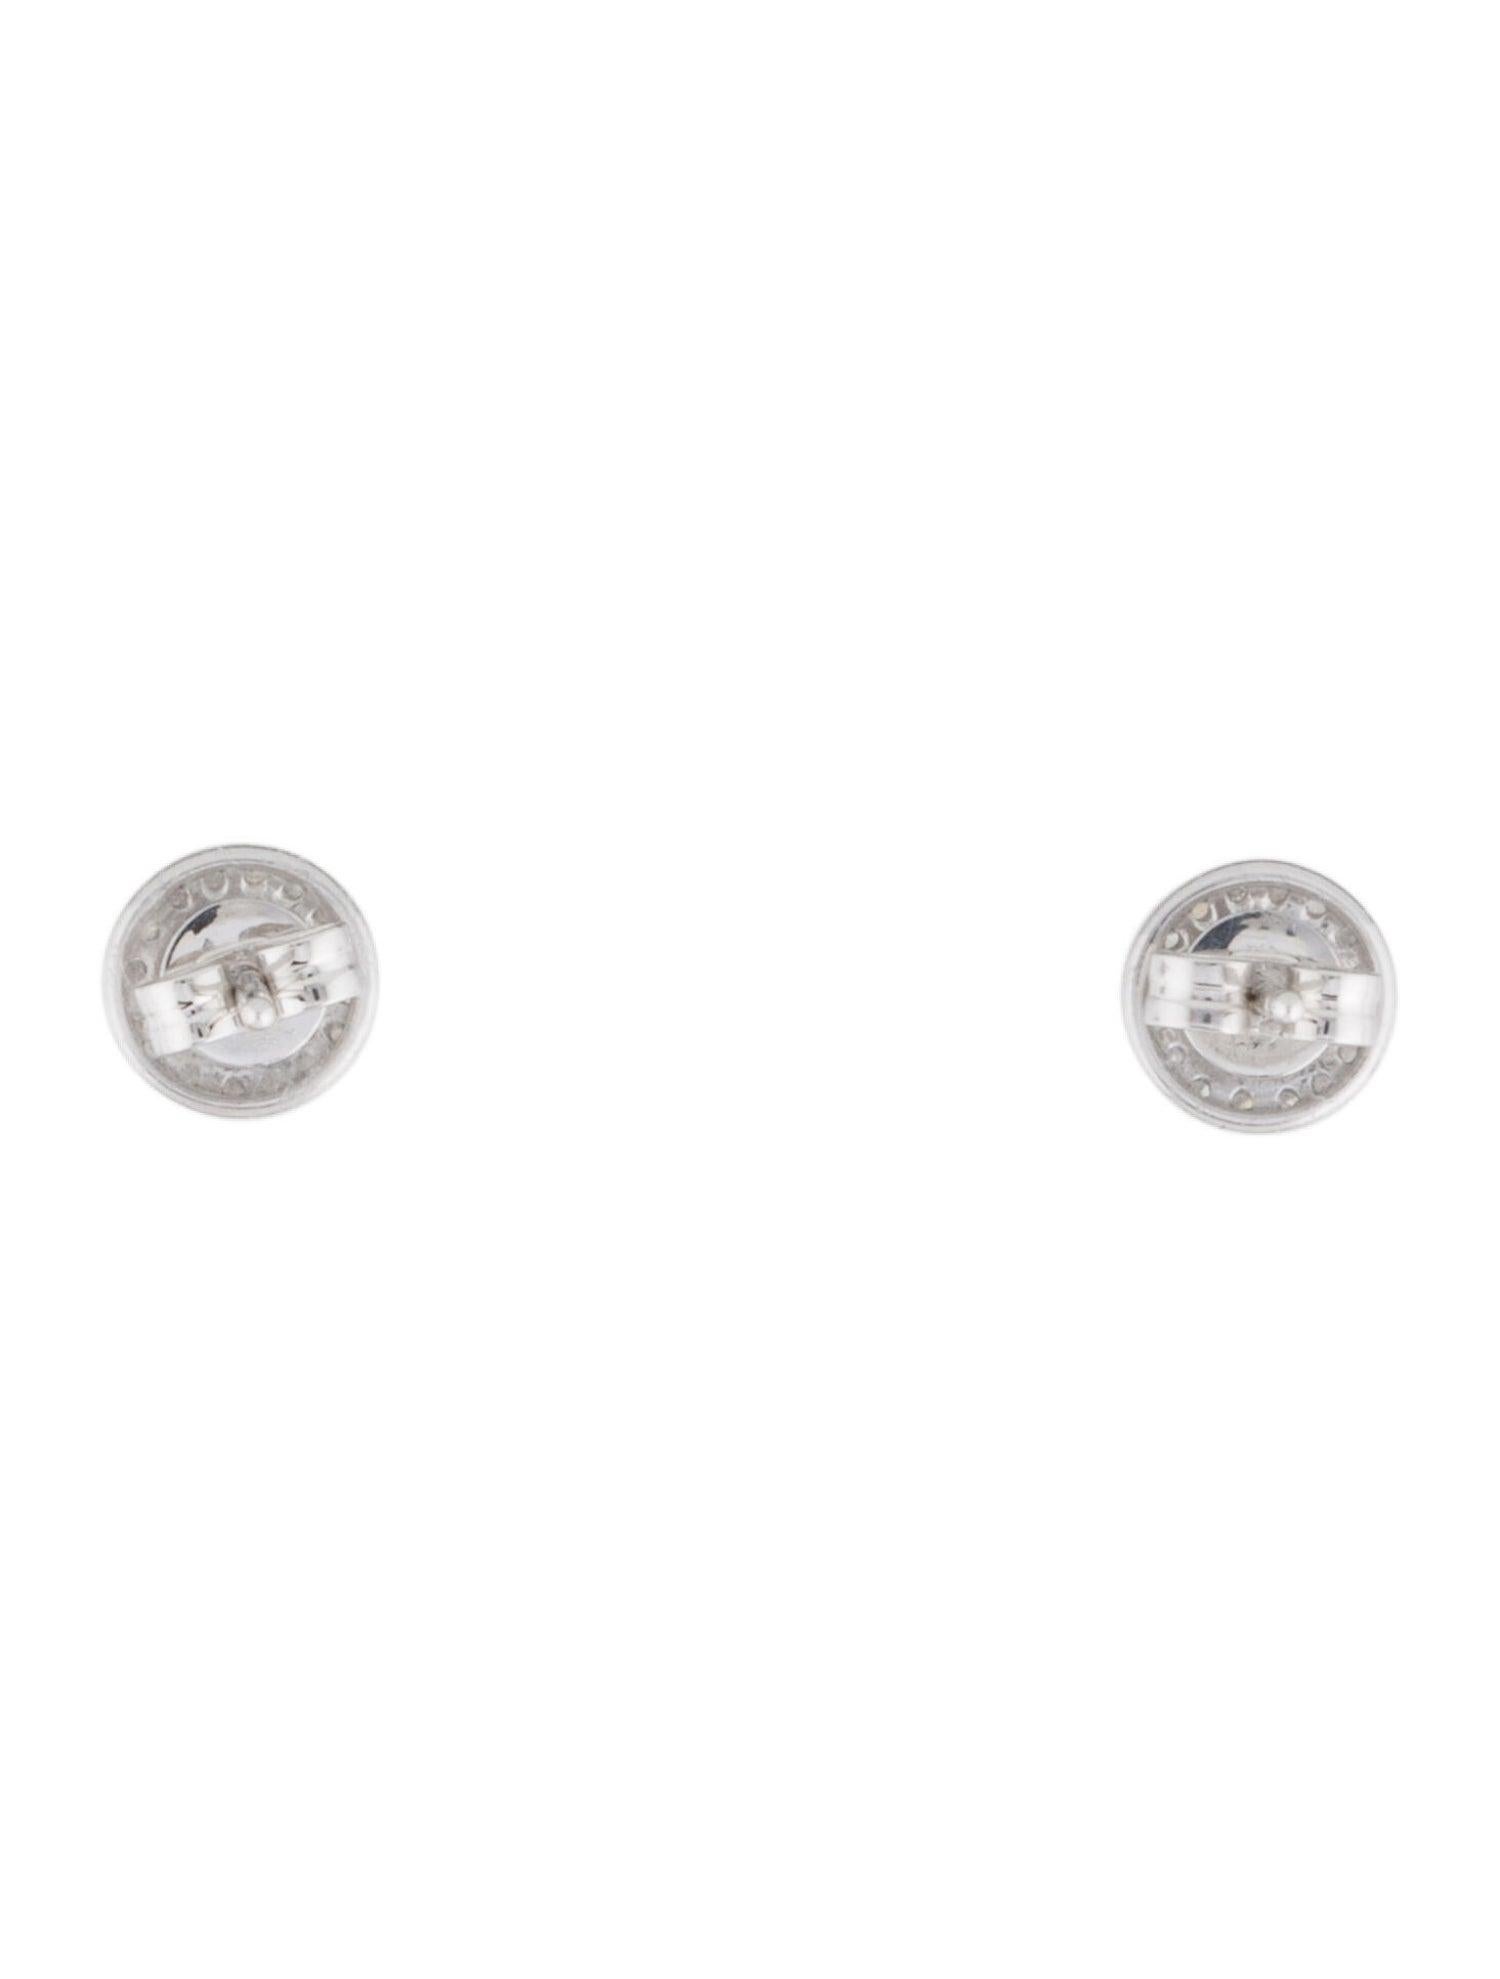 Contemporary 14 Karat White Gold 0.18 Carat Diamond Round Pave Disc Stud Earrings For Sale